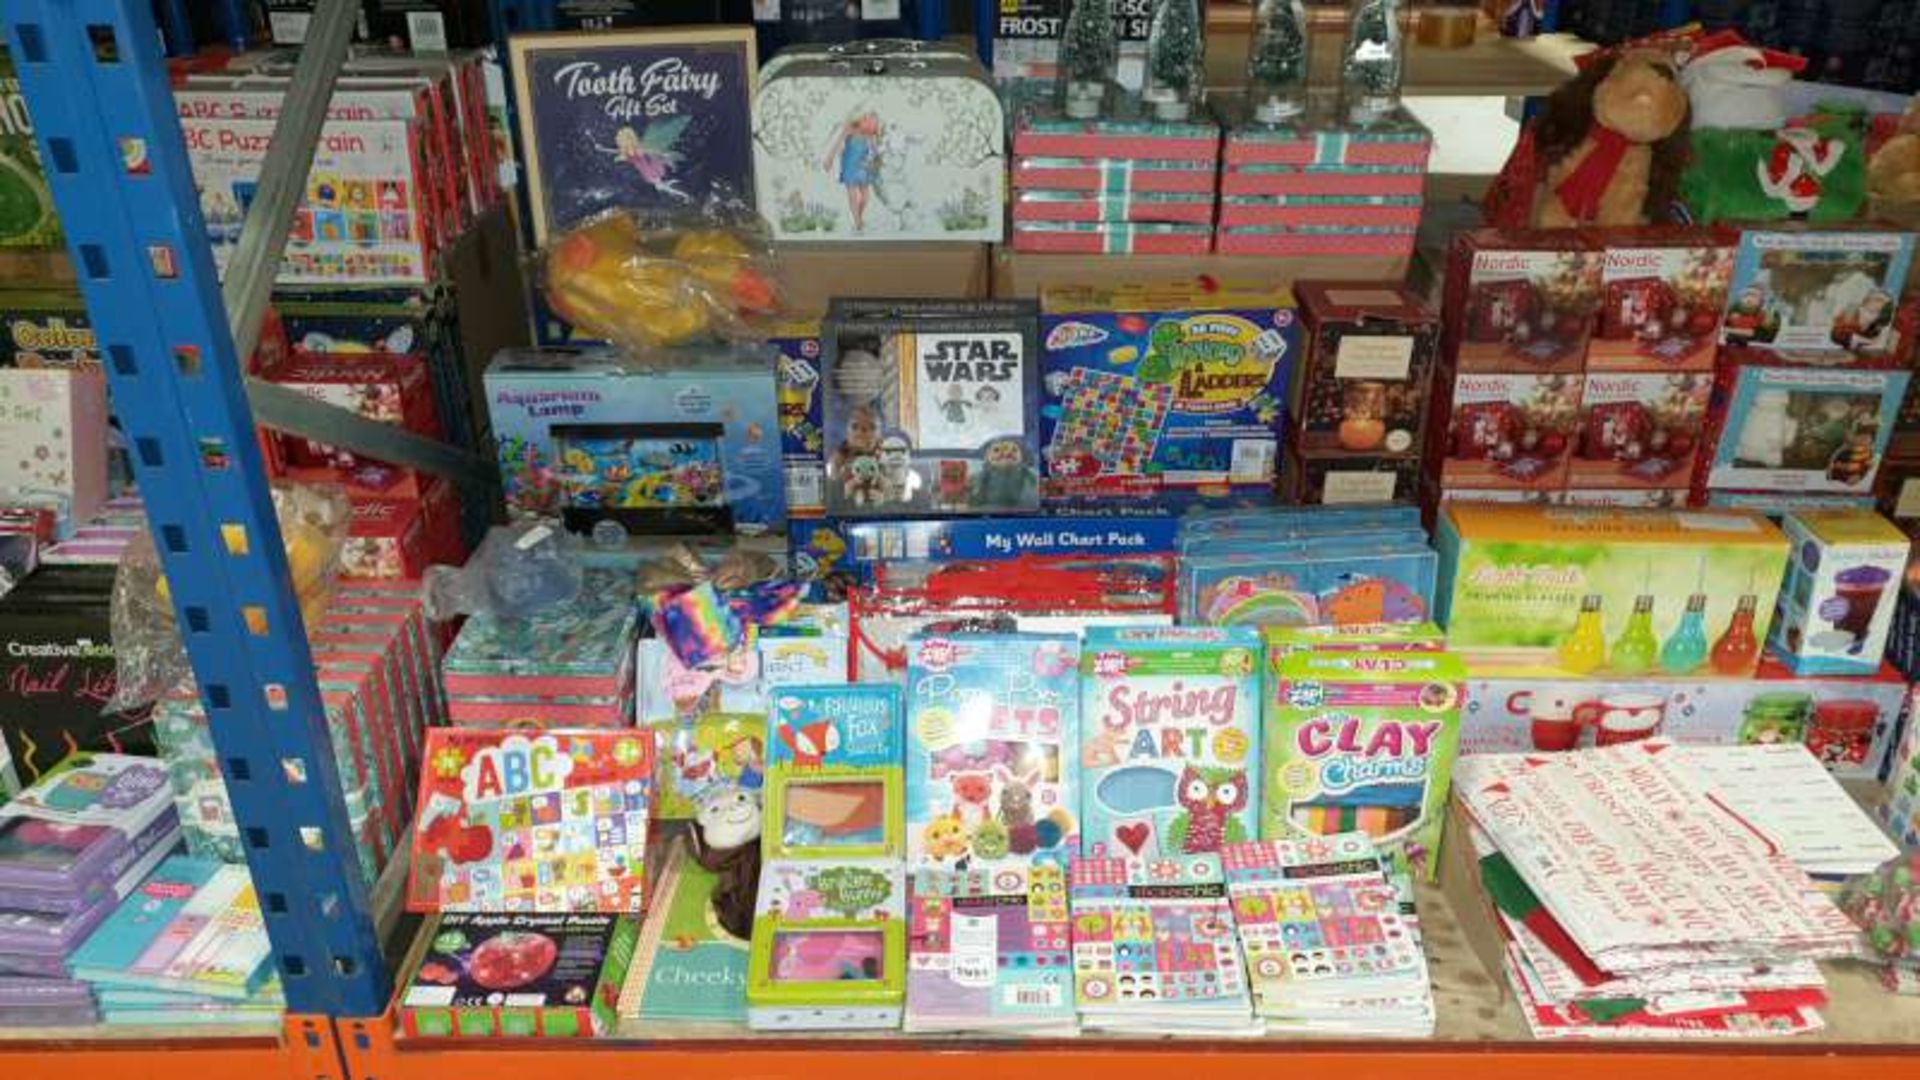 MIXED LOT CONTAINING POM POM PETS, MY FABULOUS FOX, ABC FLOOR PUZZLES, WALL CHARTS, SNAKES AND